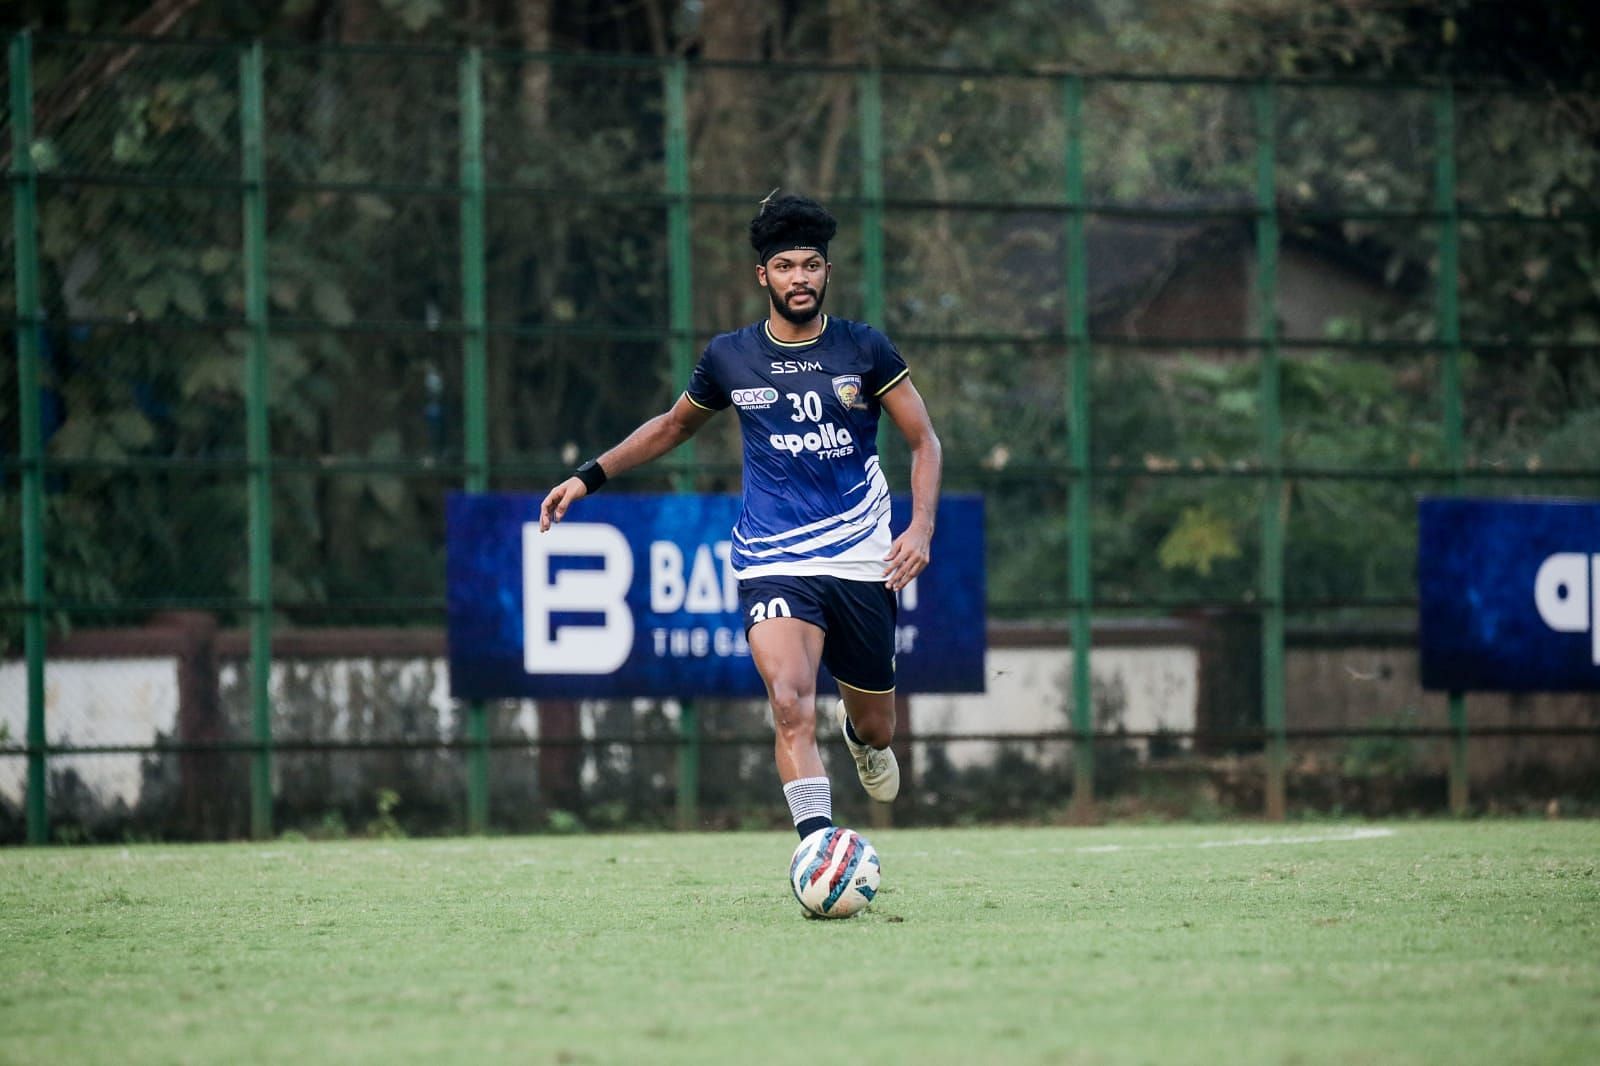 Melroy Assisi represented the Chennaiyin FC reserve team in the 2019 Durand Cup. (Image Courtesy: Chennaiyin FC)